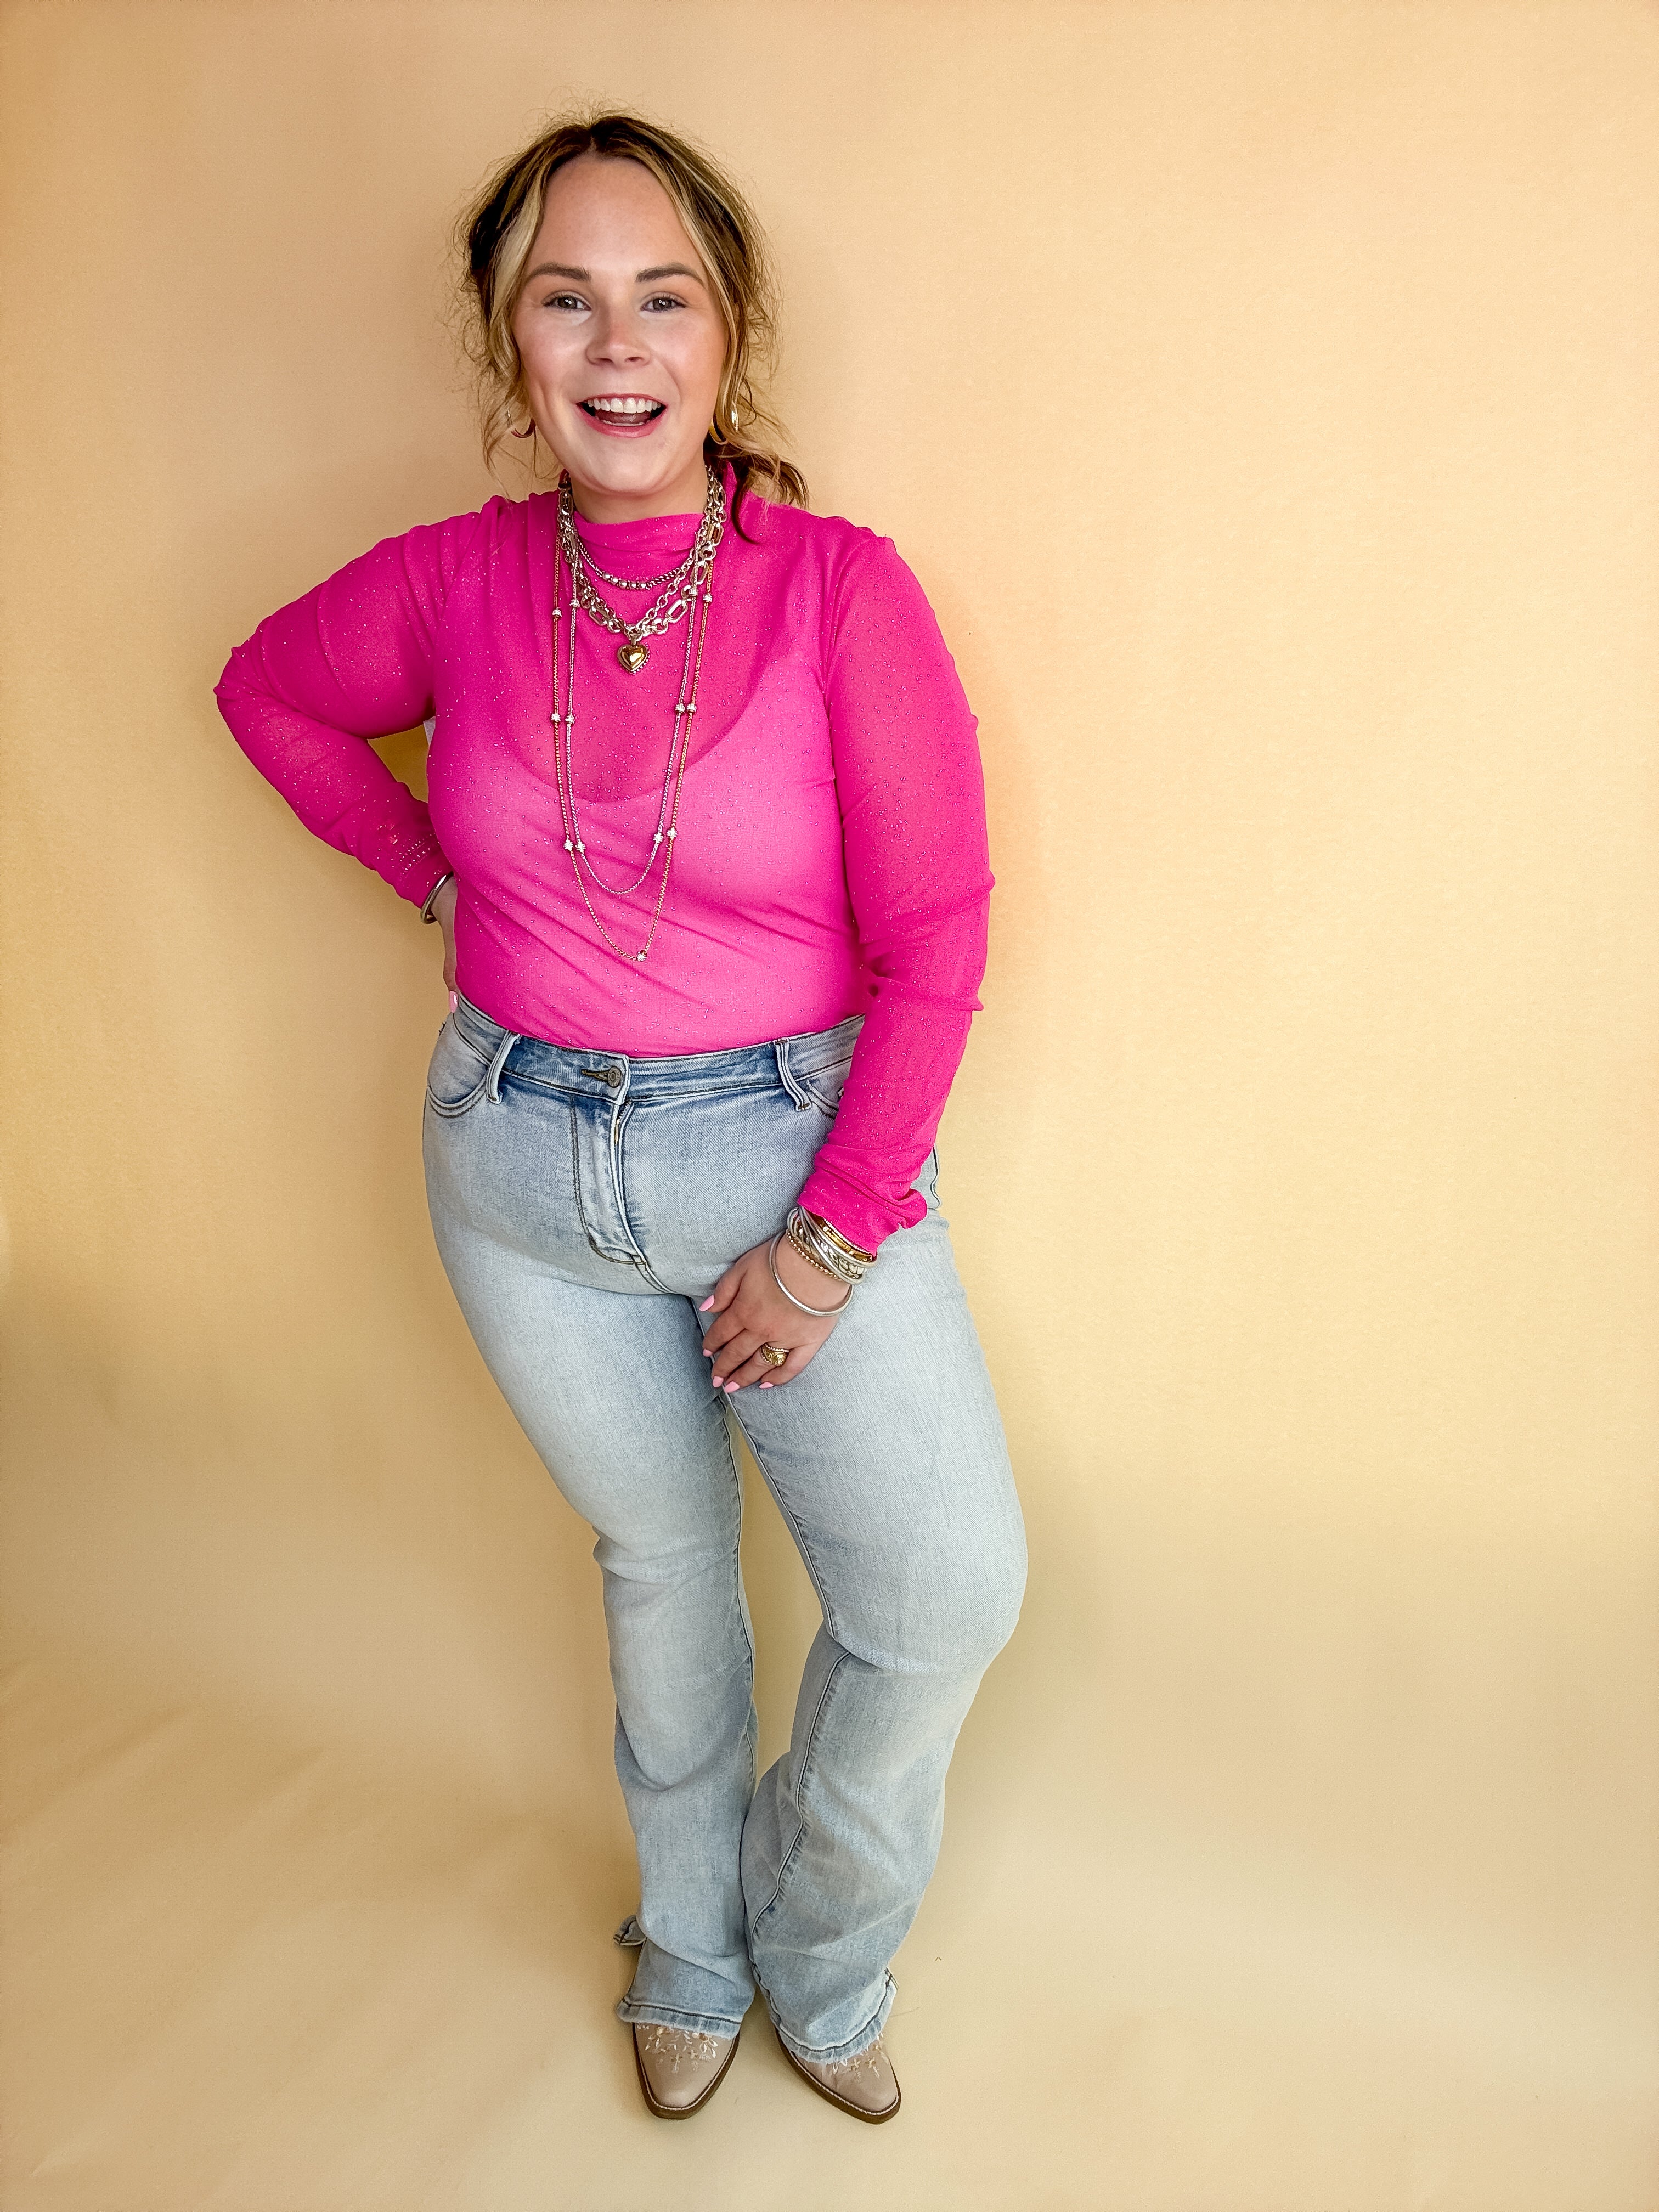 Plus Sizes | Try Your Luck Glitter Mesh Long Sleeve Bodysuit in Pink - Giddy Up Glamour Boutique